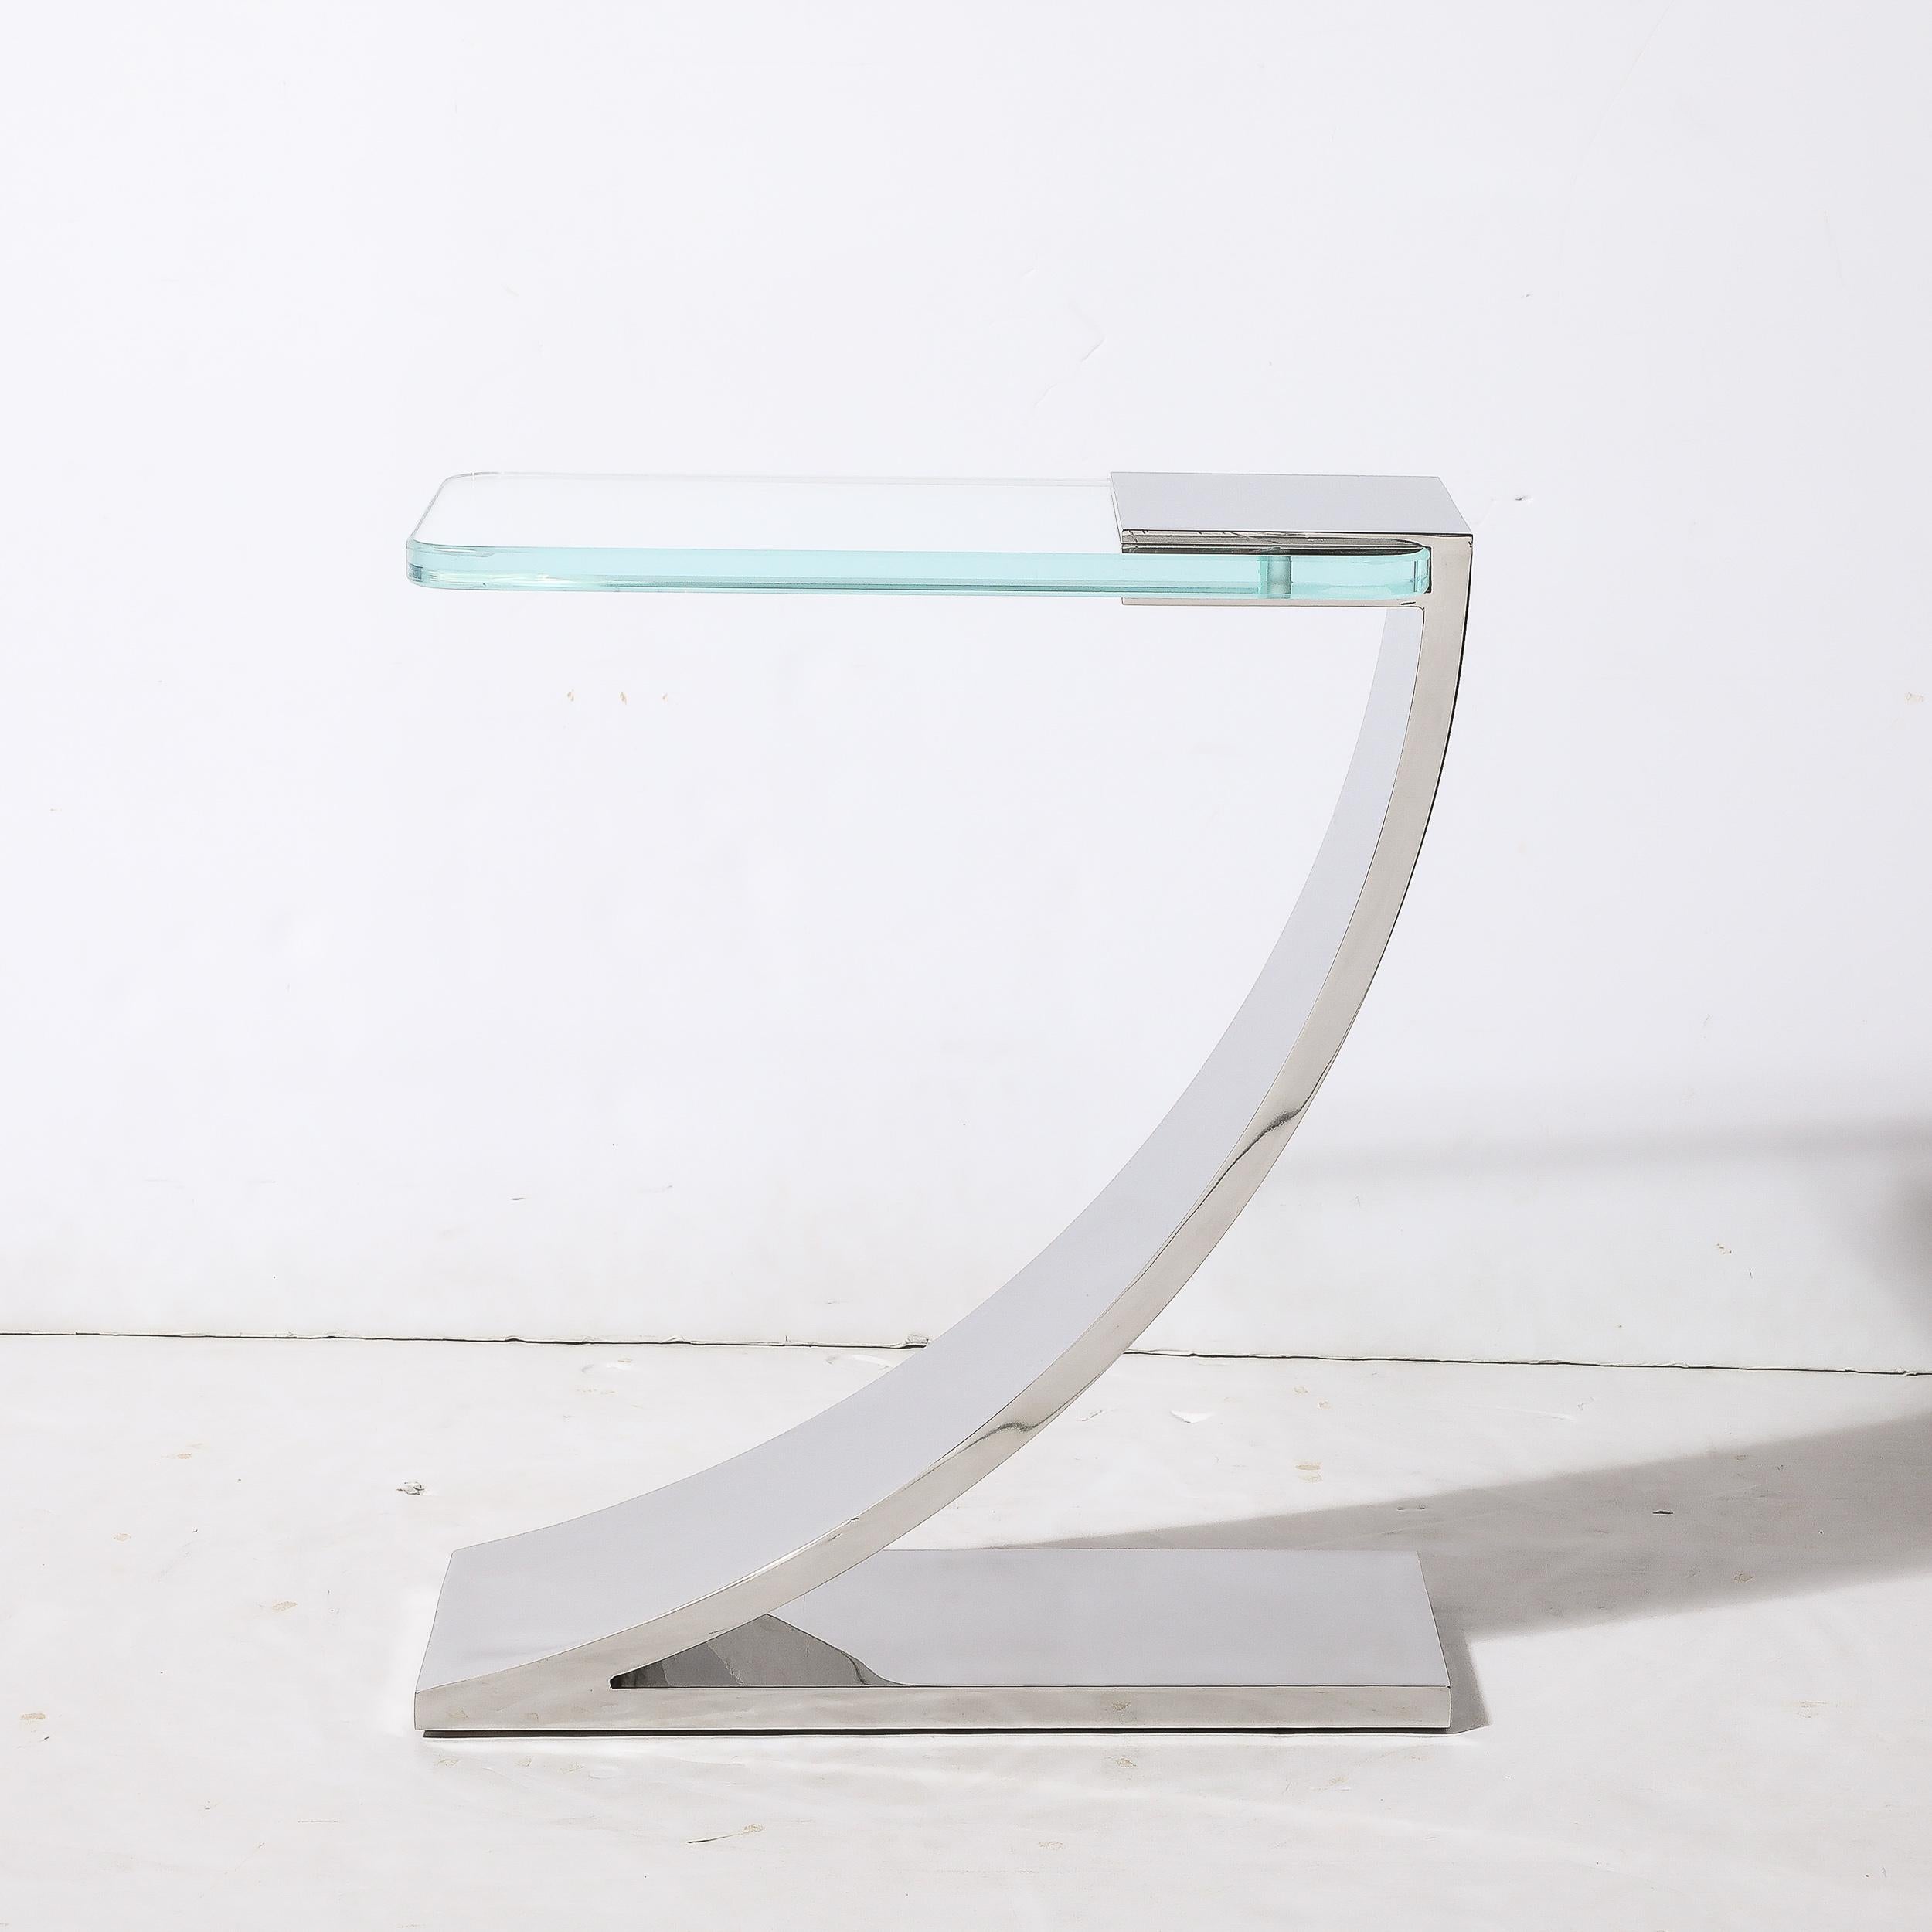 This sleek and sophisticated custom fabricated Modernist Cantilevered Side Table With Transparent Glass Top in Polished Nickel, made for High Style Deco in New York, originates from the United States during the 21st Century. This example is in